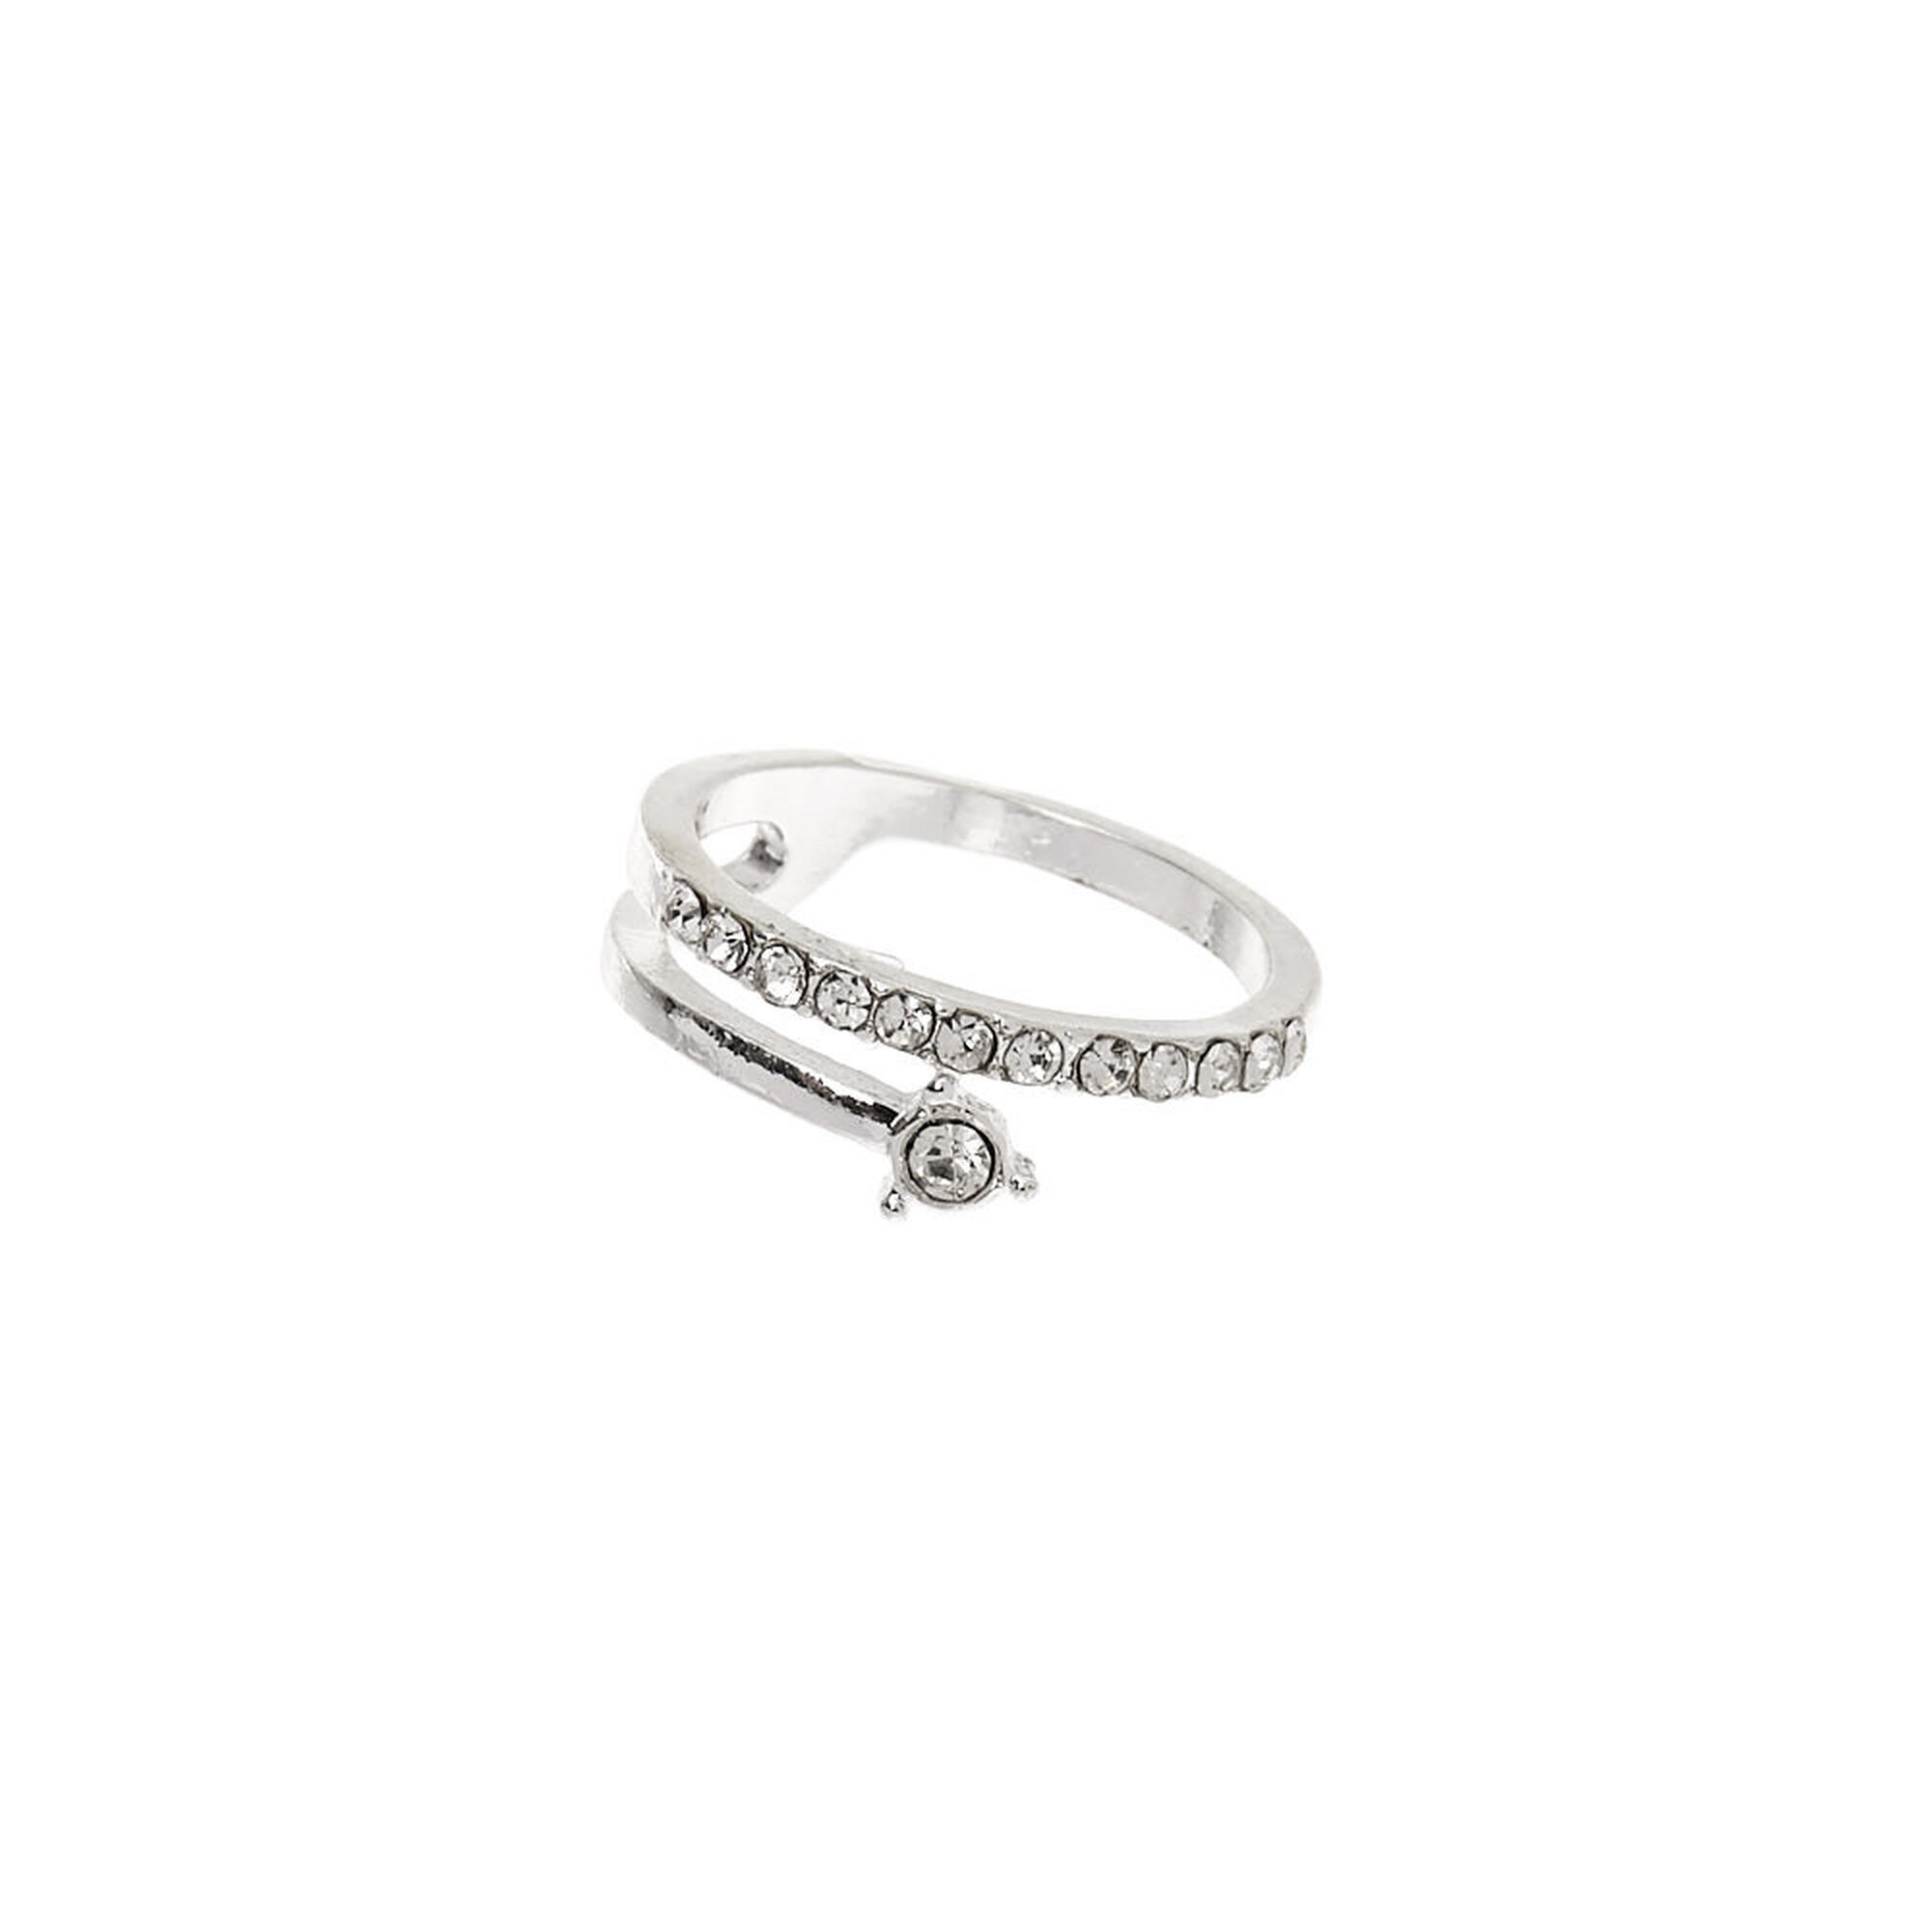 Silver Crystal Wrap Around Toe Ring | Claire's US